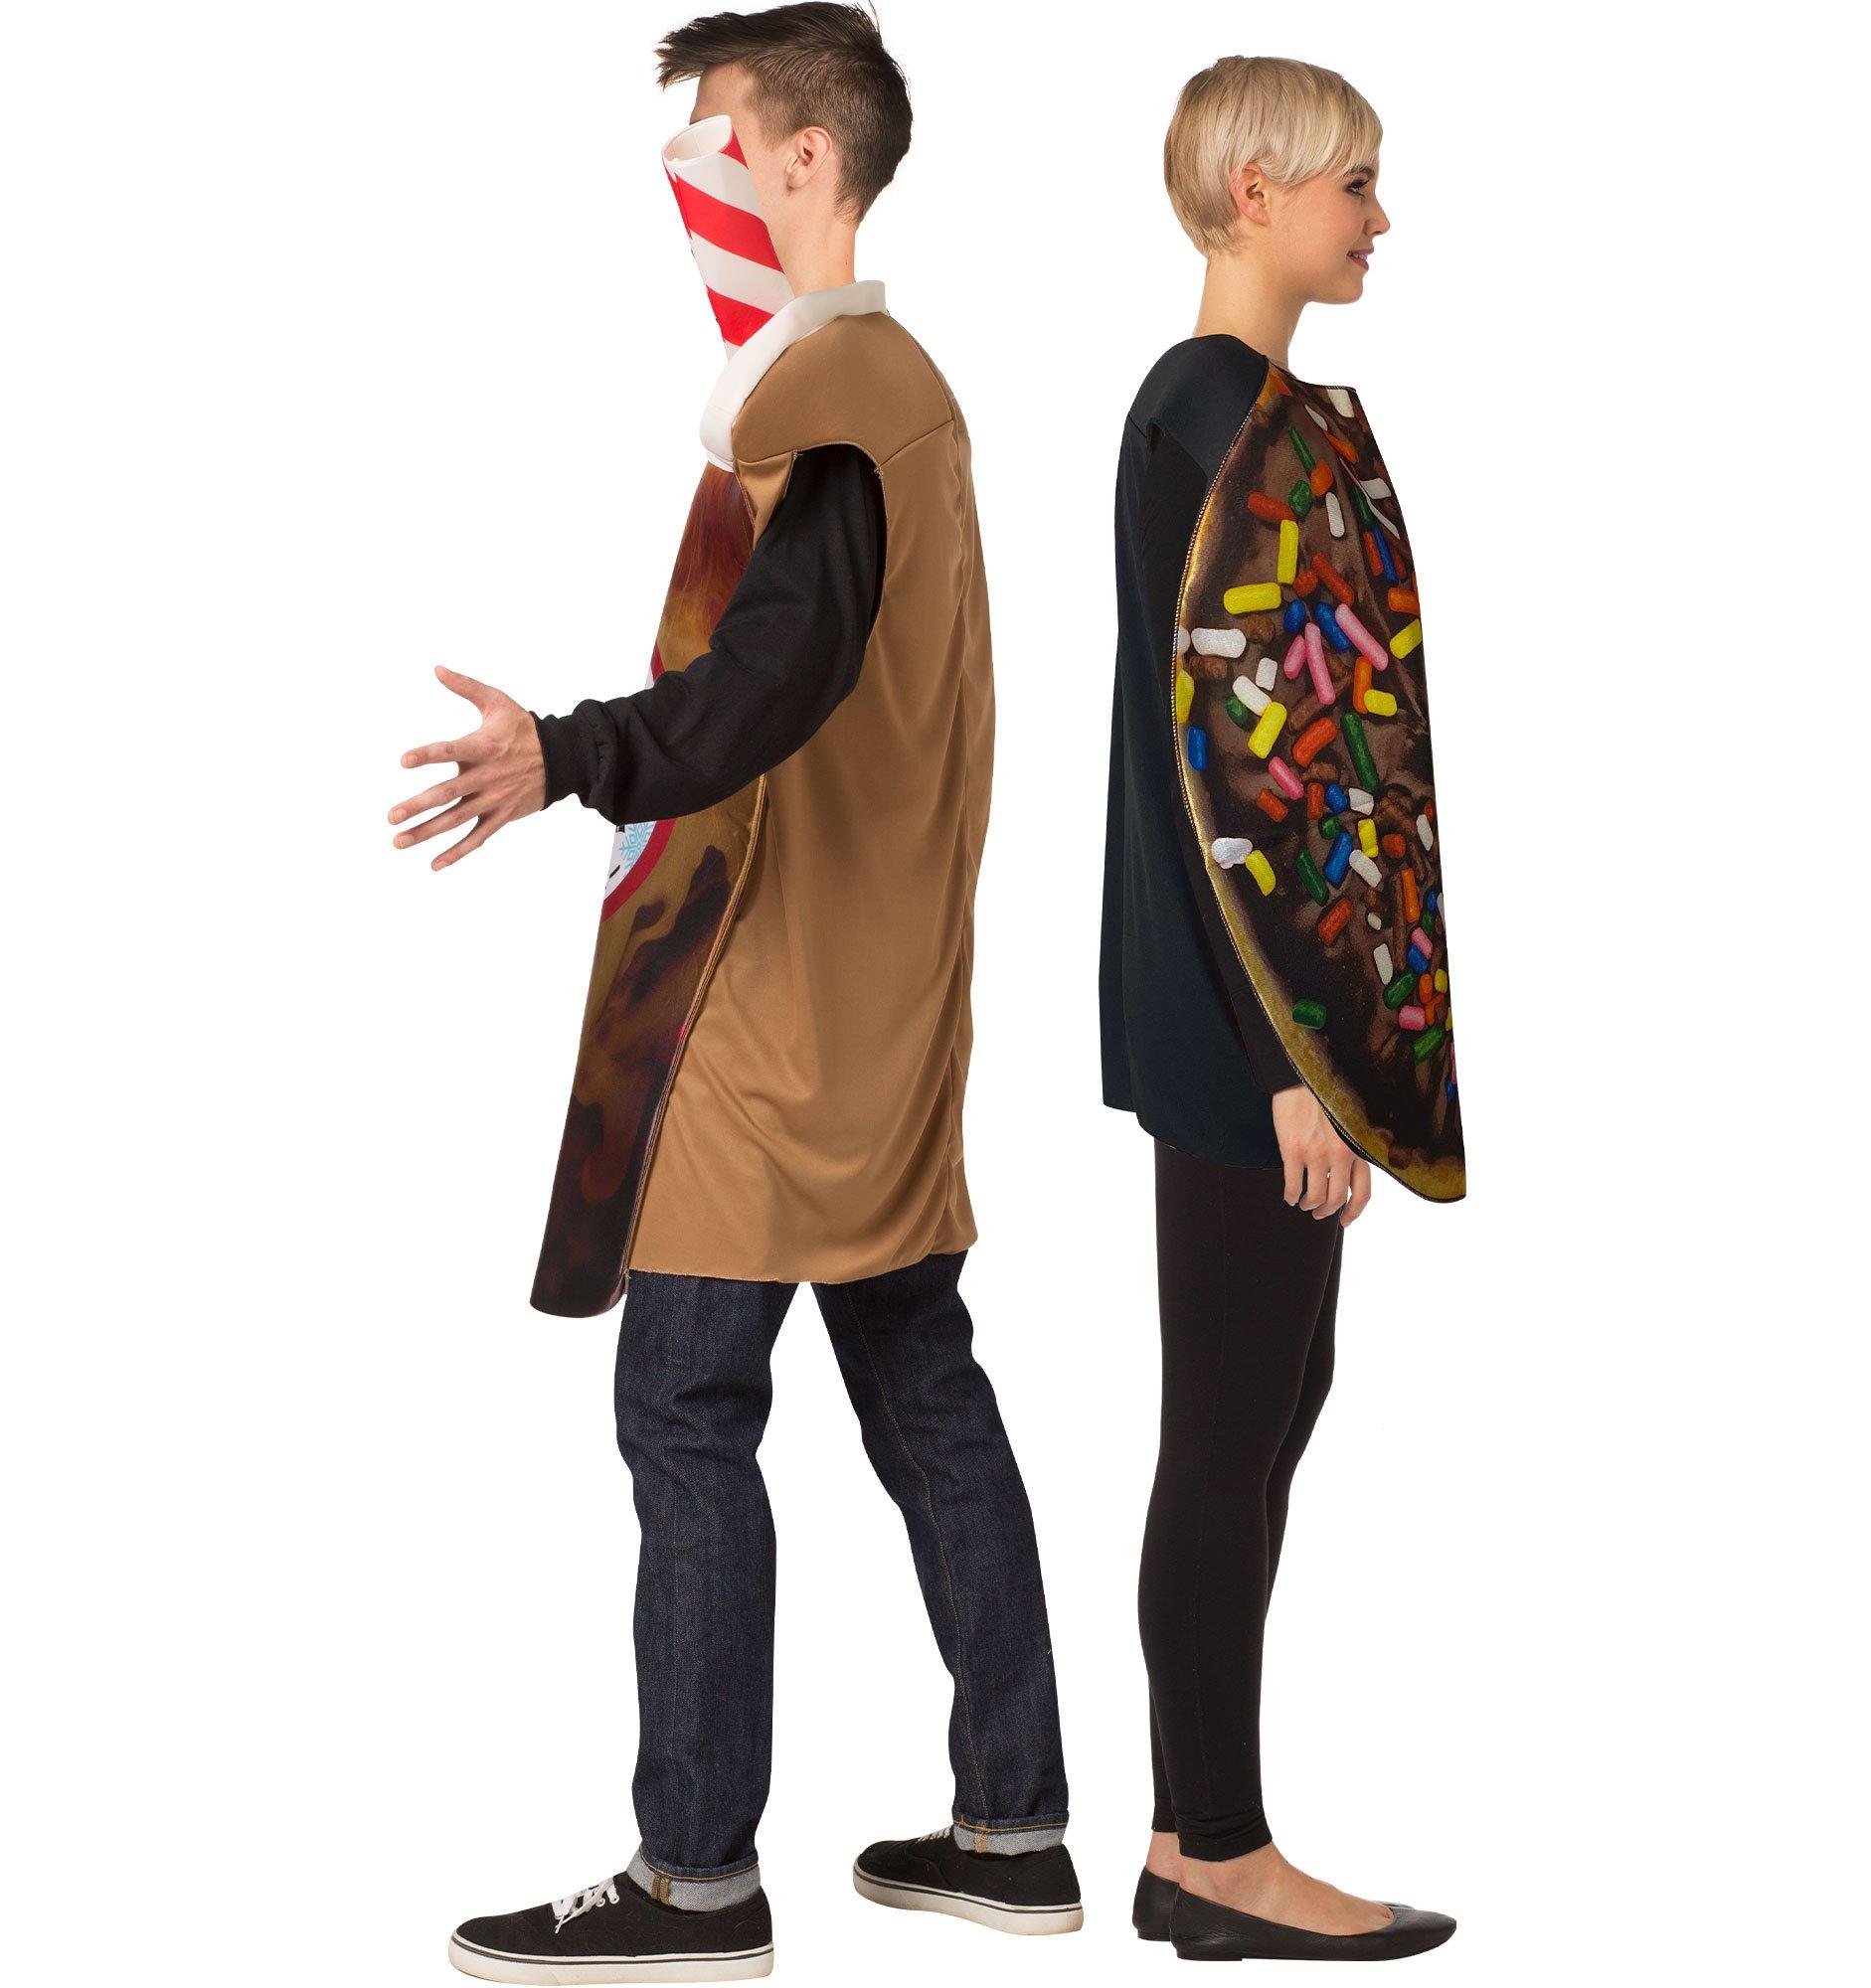 Sprinkle Donut & Cold Brew Coffee Couples Costumes for Adults